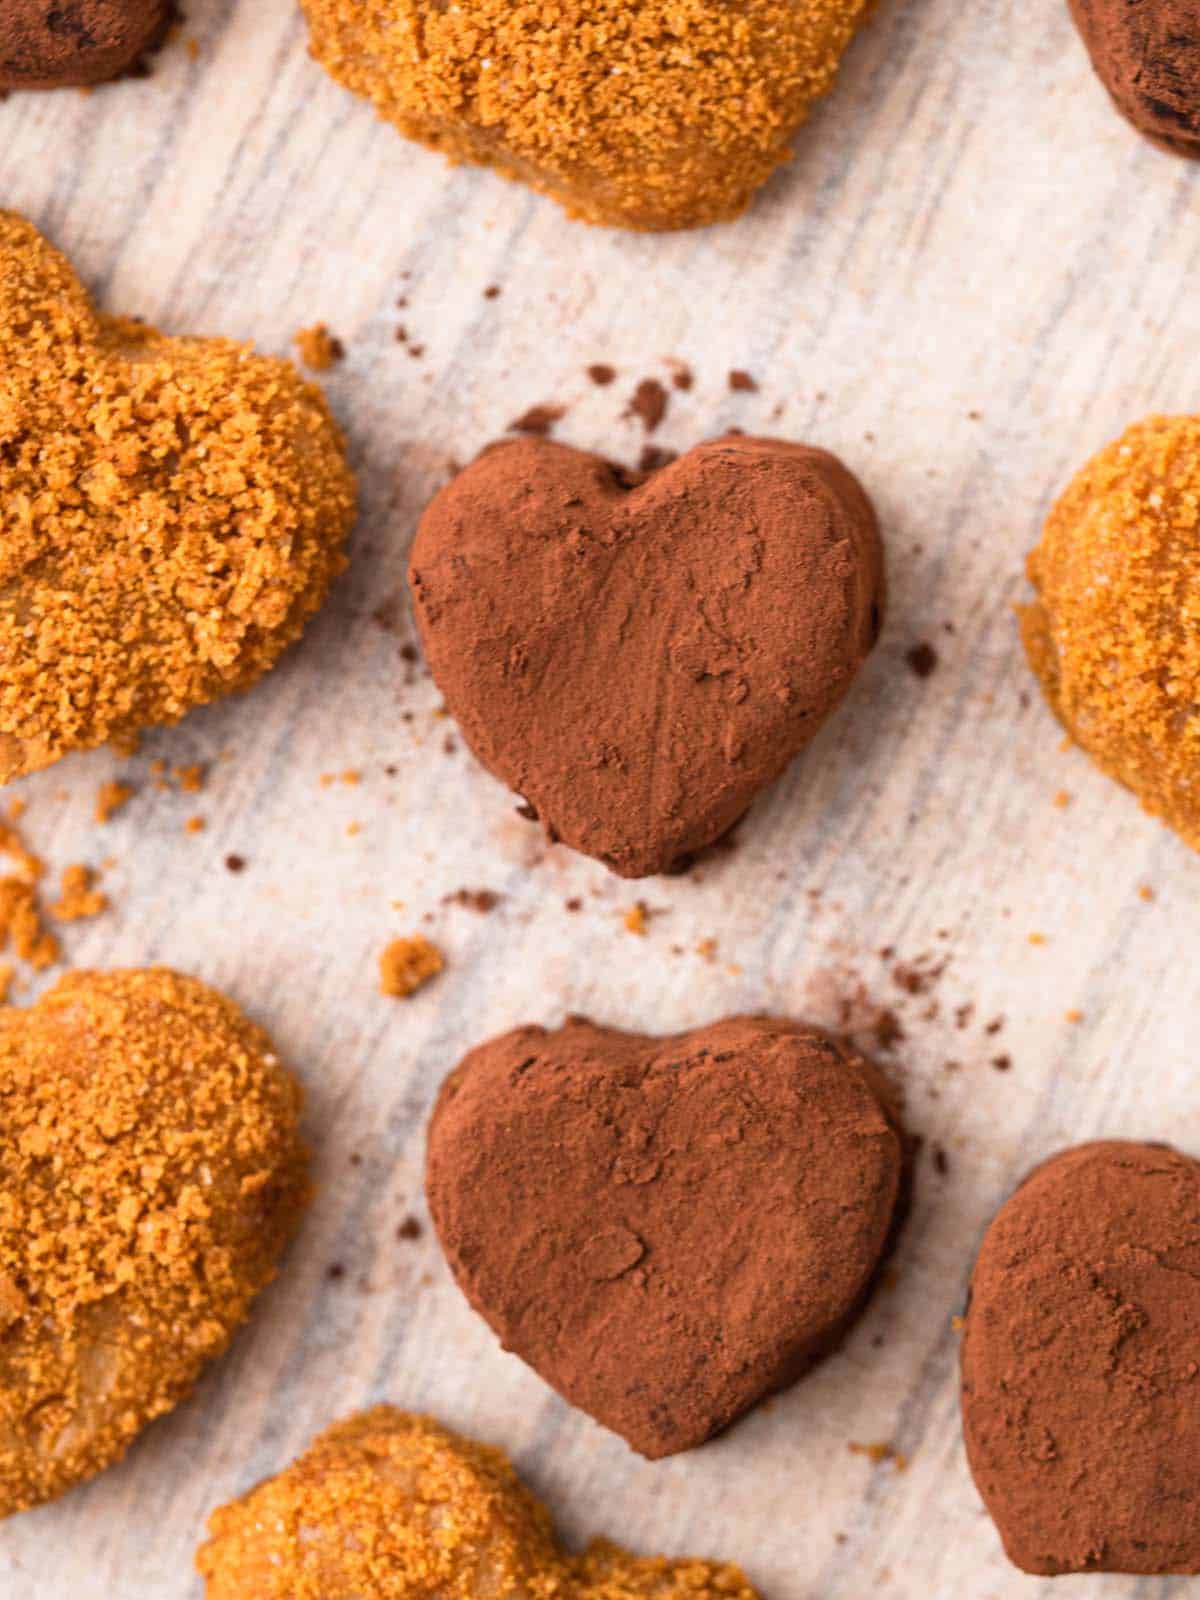 biscoff truffles dusted in cocoa powder and lotus cookie crumbs